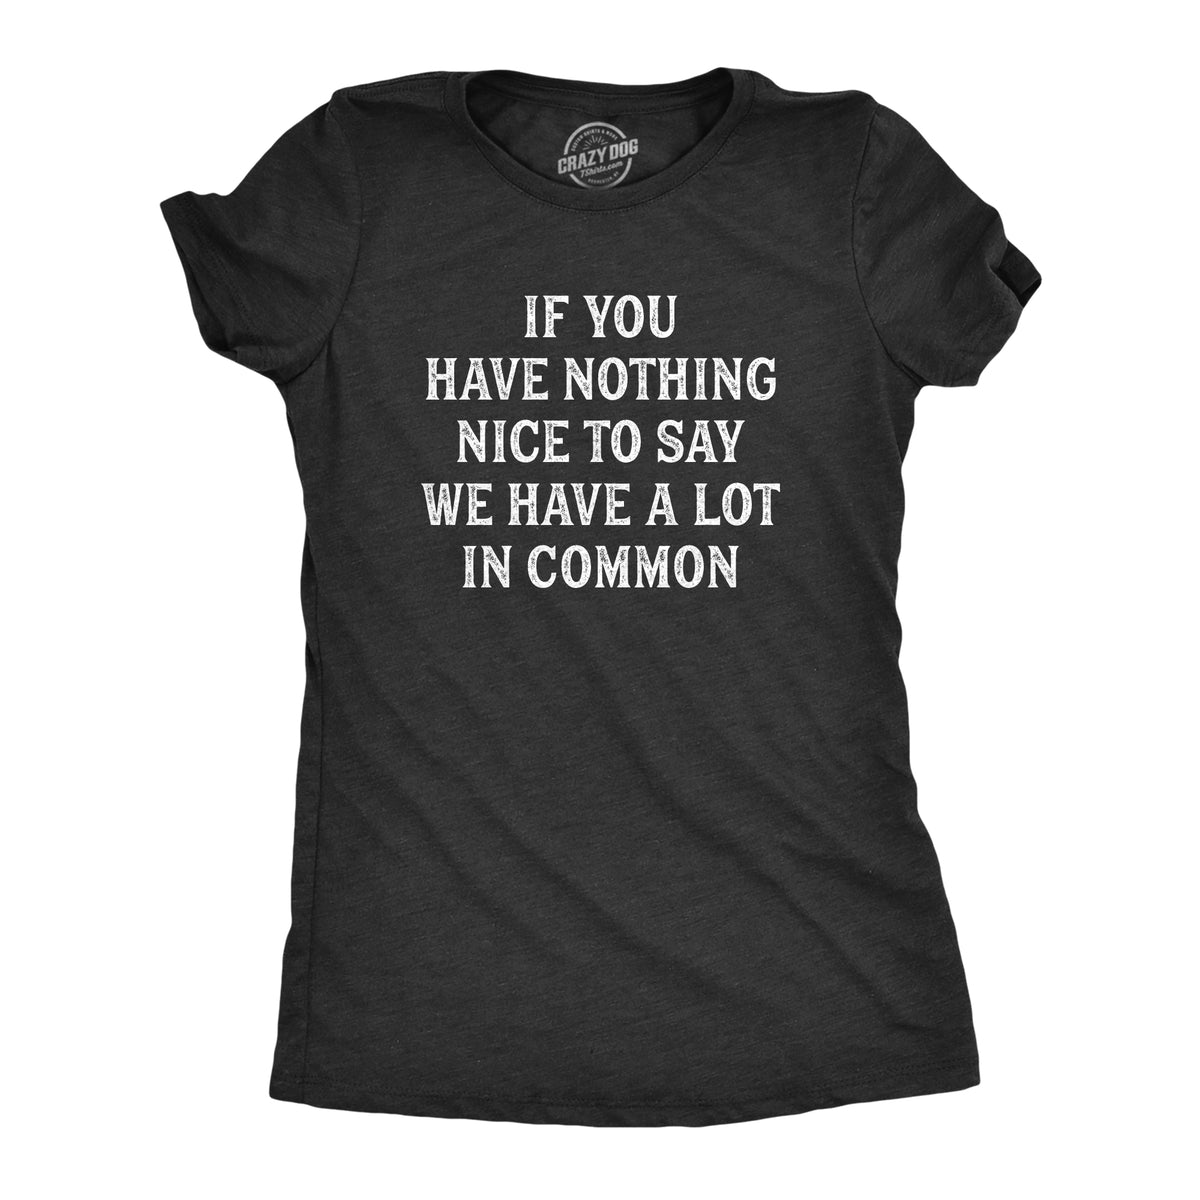 Funny Heather Black - COMMON If You Have Nothing Nice To Say We Have A Lot In Common Womens T Shirt Nerdy sarcastic Tee